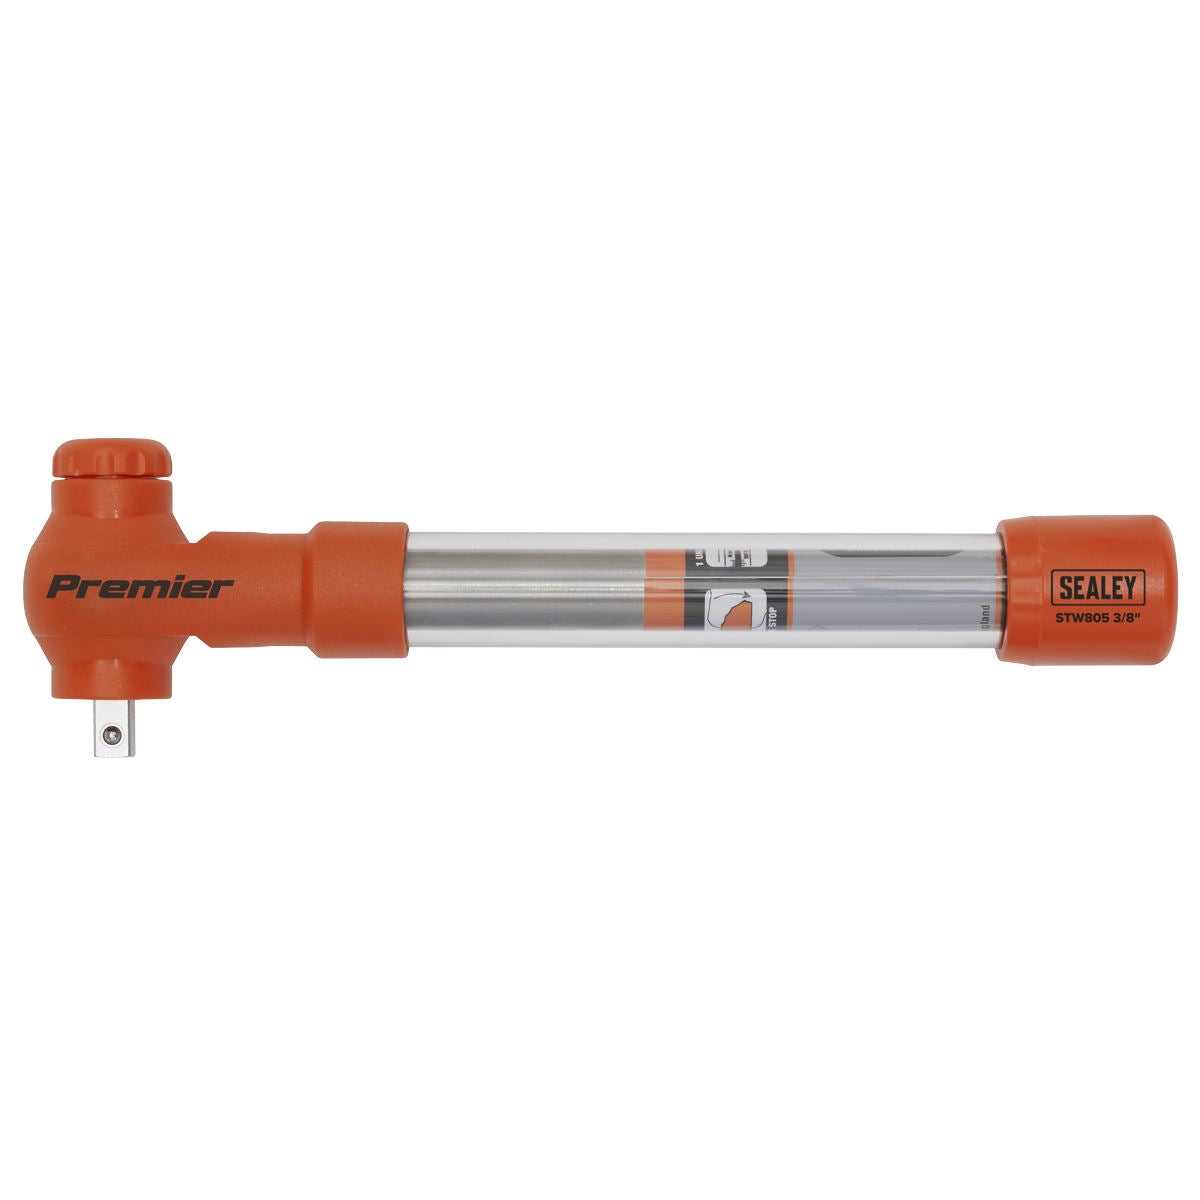 Sealey Premier Torque Wrench Insulated 3/8"Sq Drive 5-25Nm